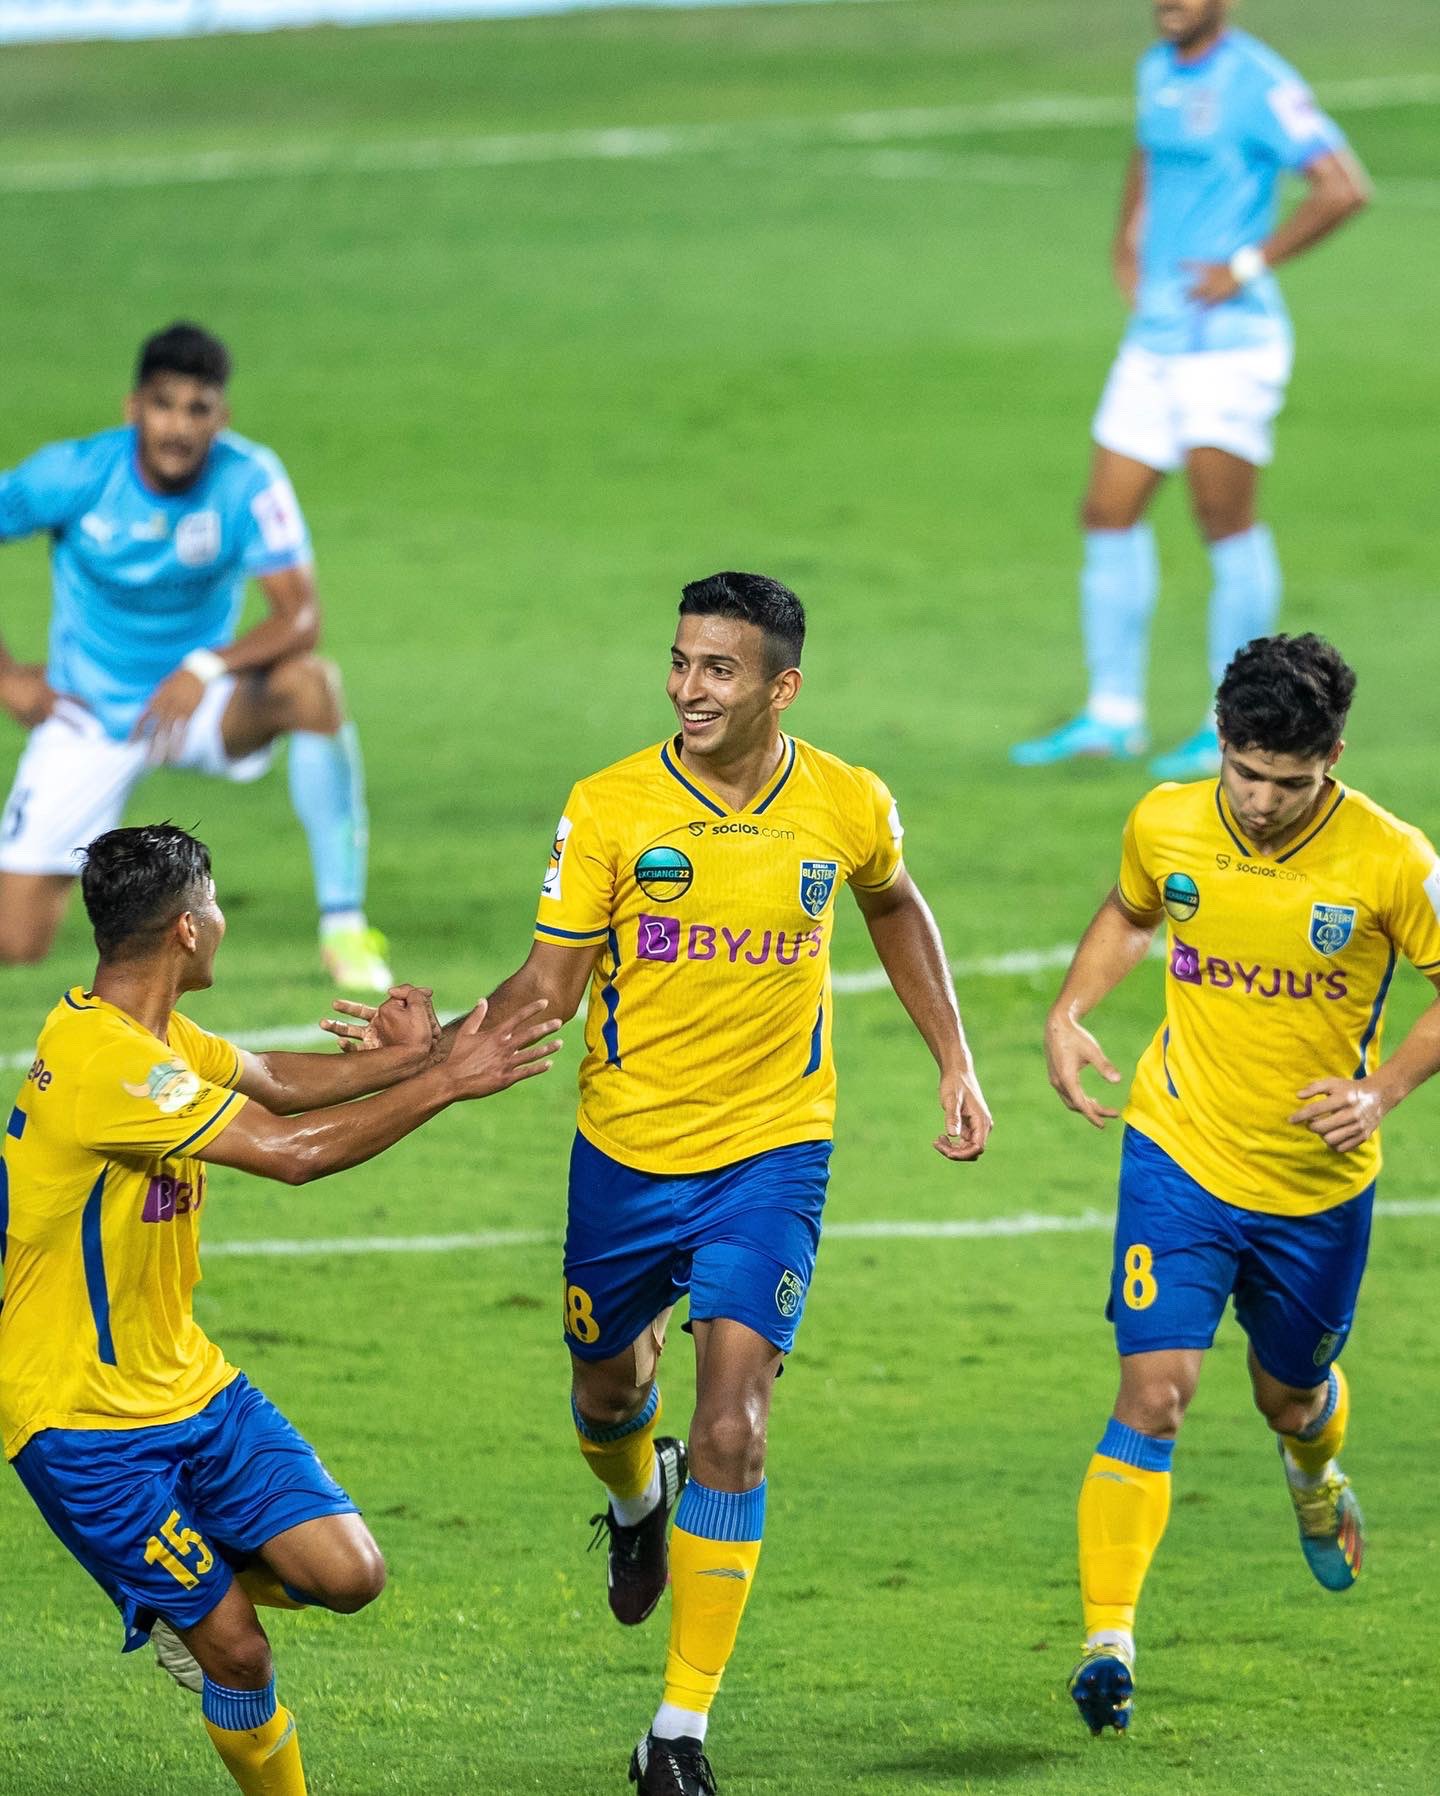 KBFC beat MCFC: Goals from Samad and Alvaro Vazquez help Kerala Blasters FC strengthen their playoffs hopes with a commanding win over Mumbai City FC